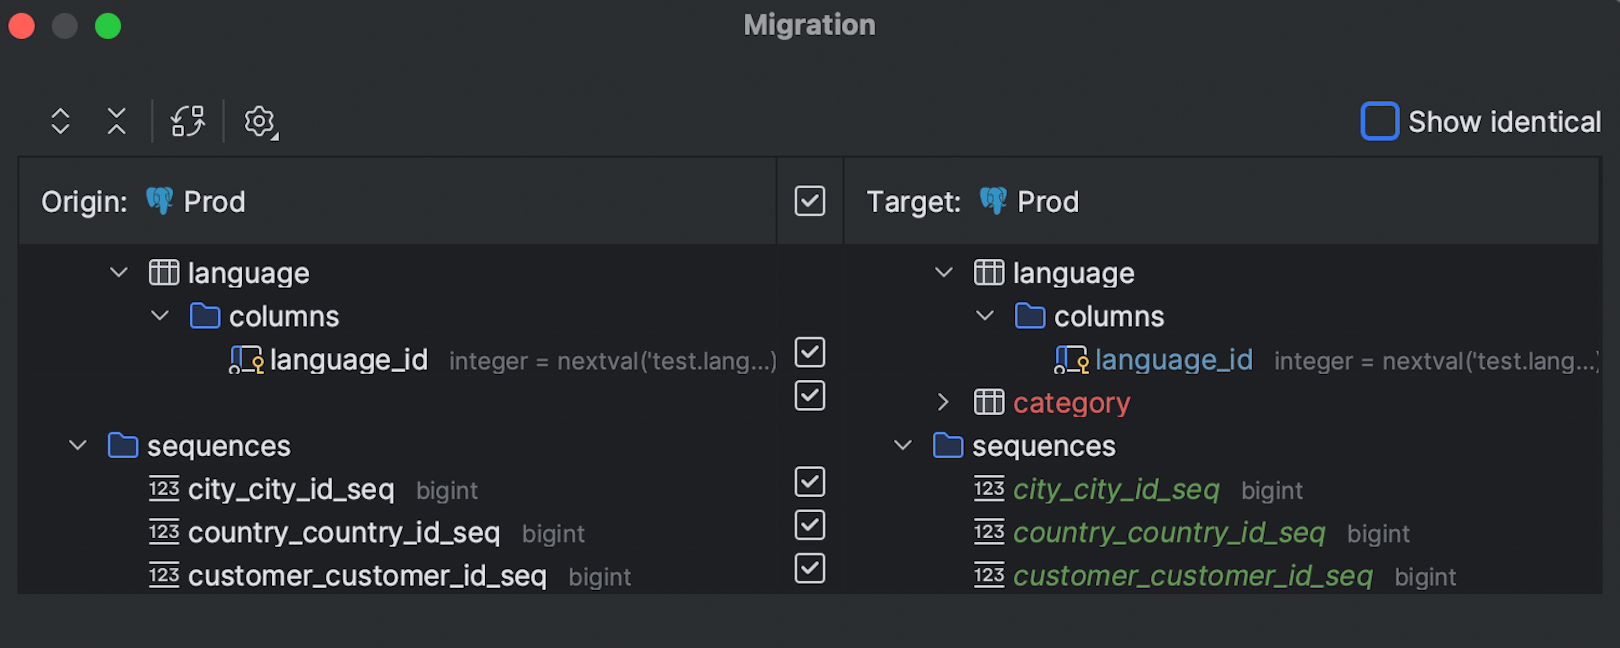 New UI for the schema migration dialog